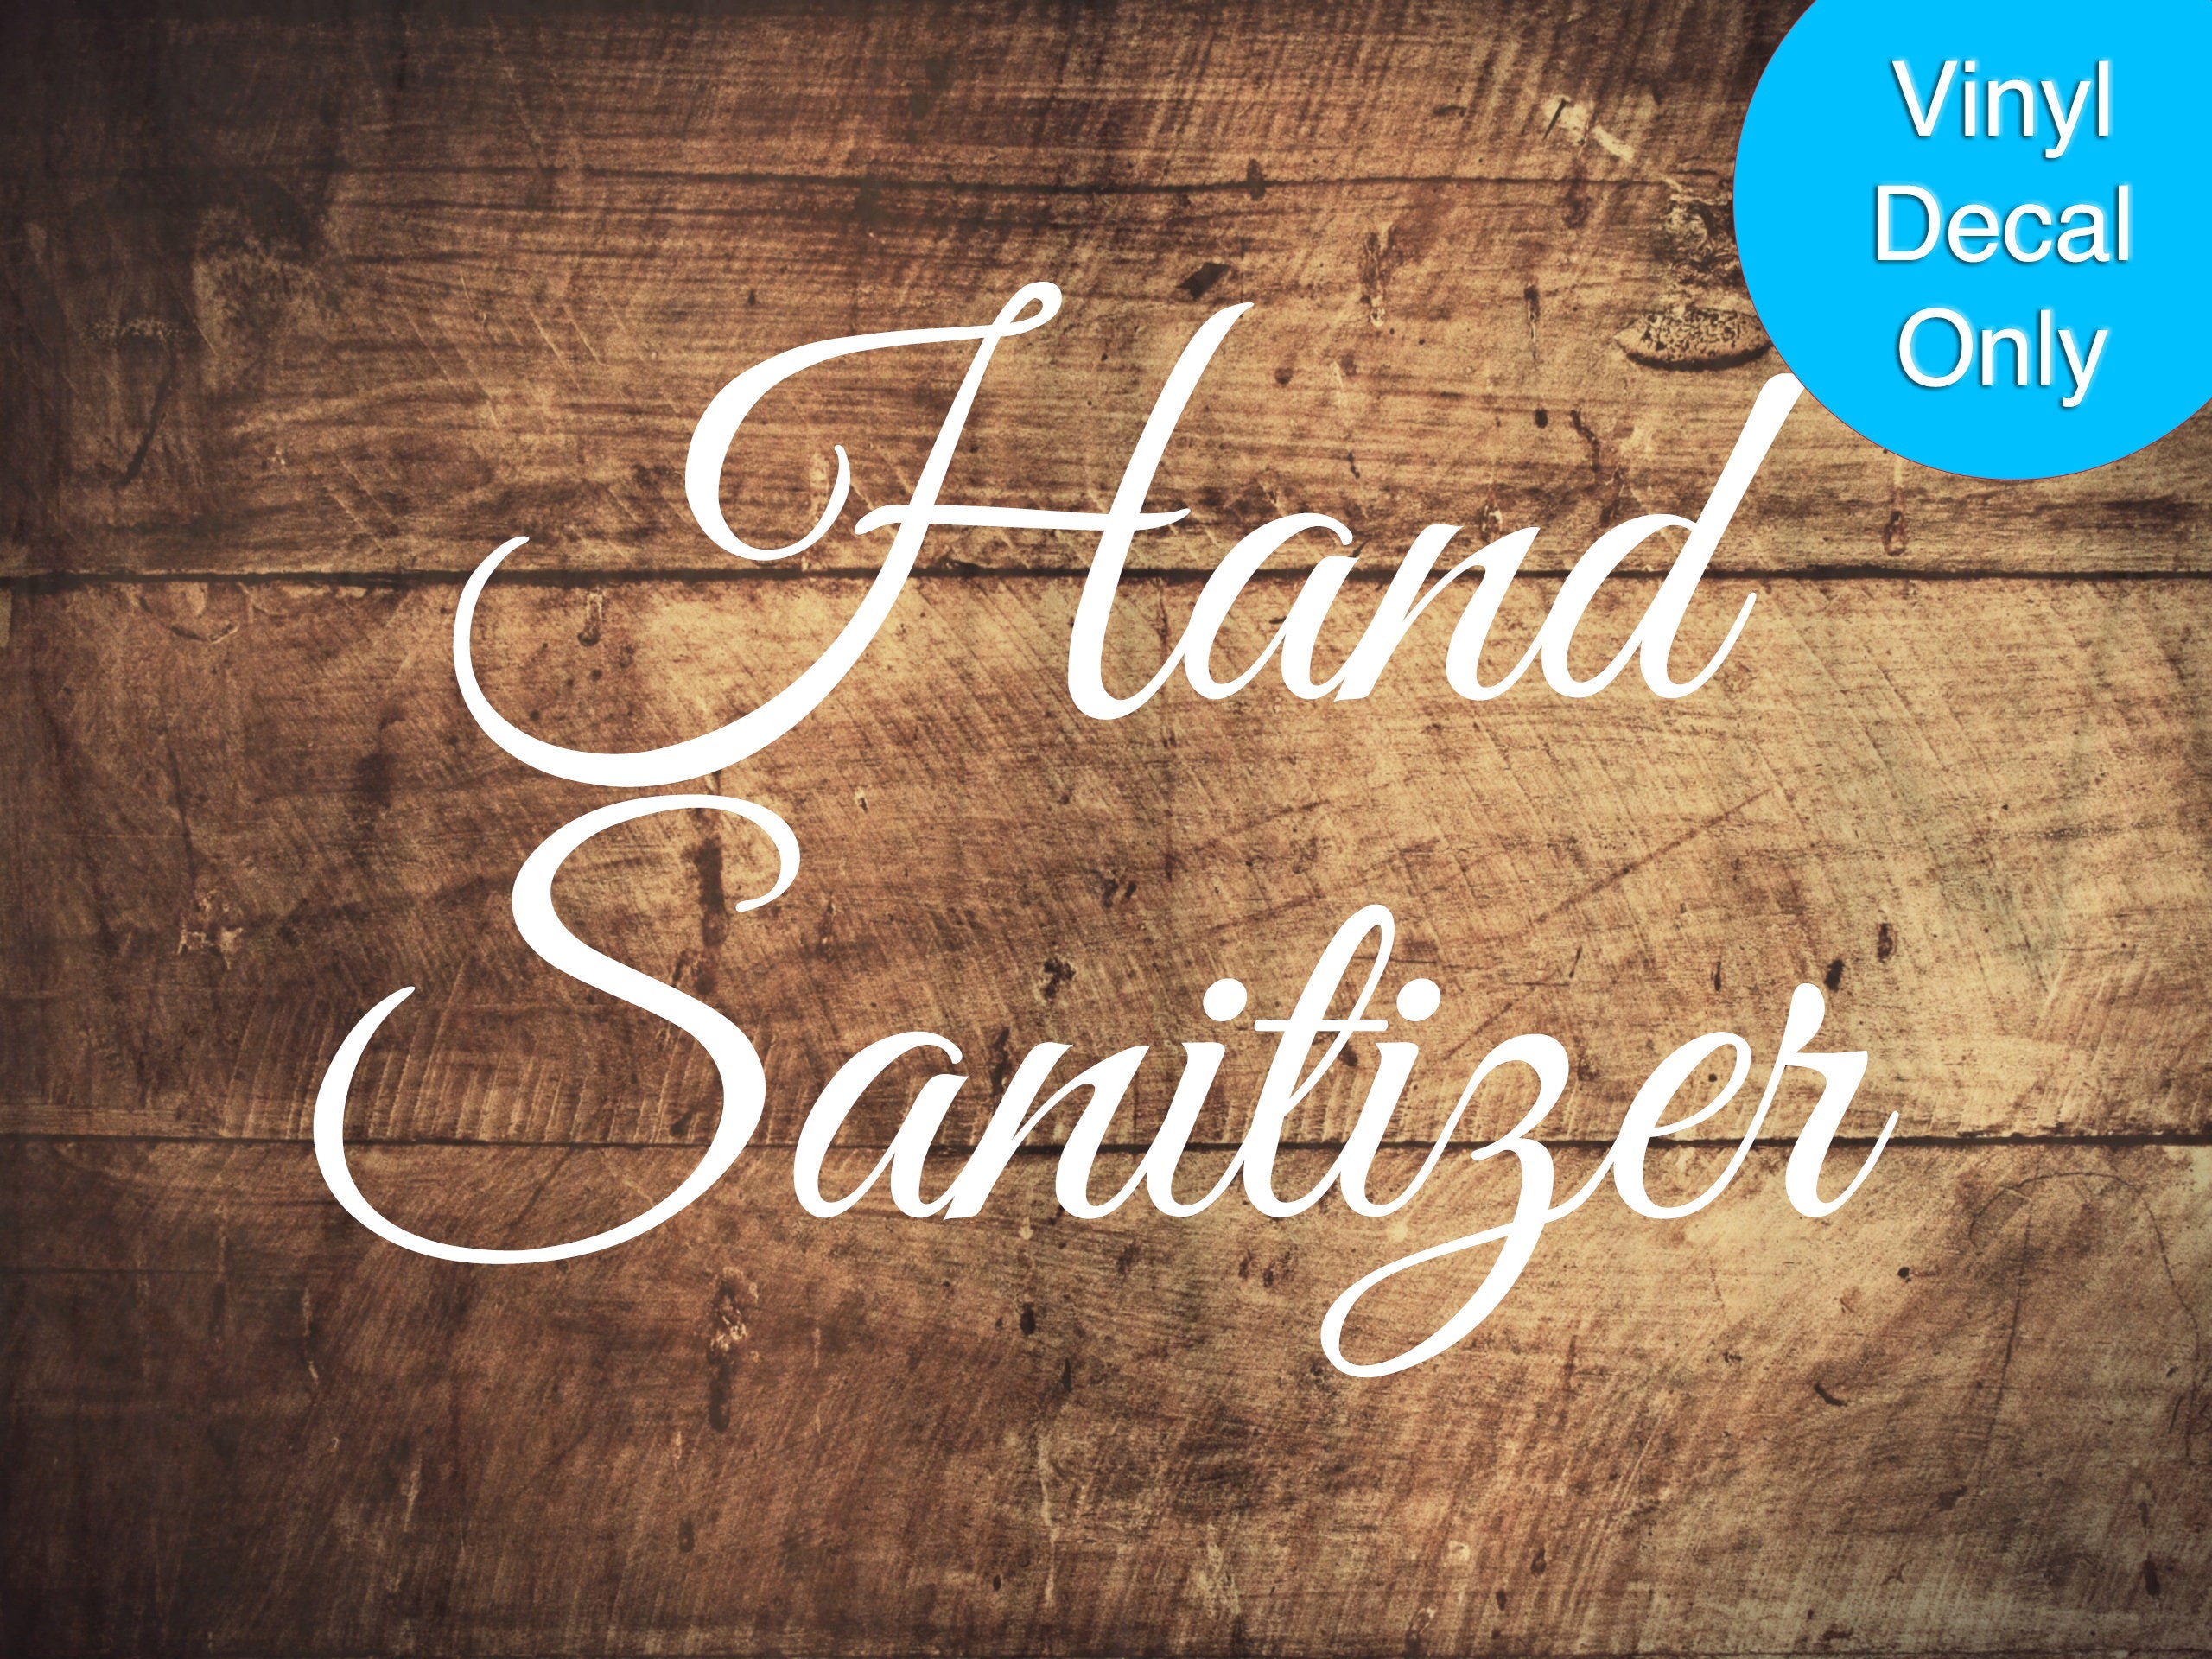 Hand Sanitizer - Vinyl Decal for Signs